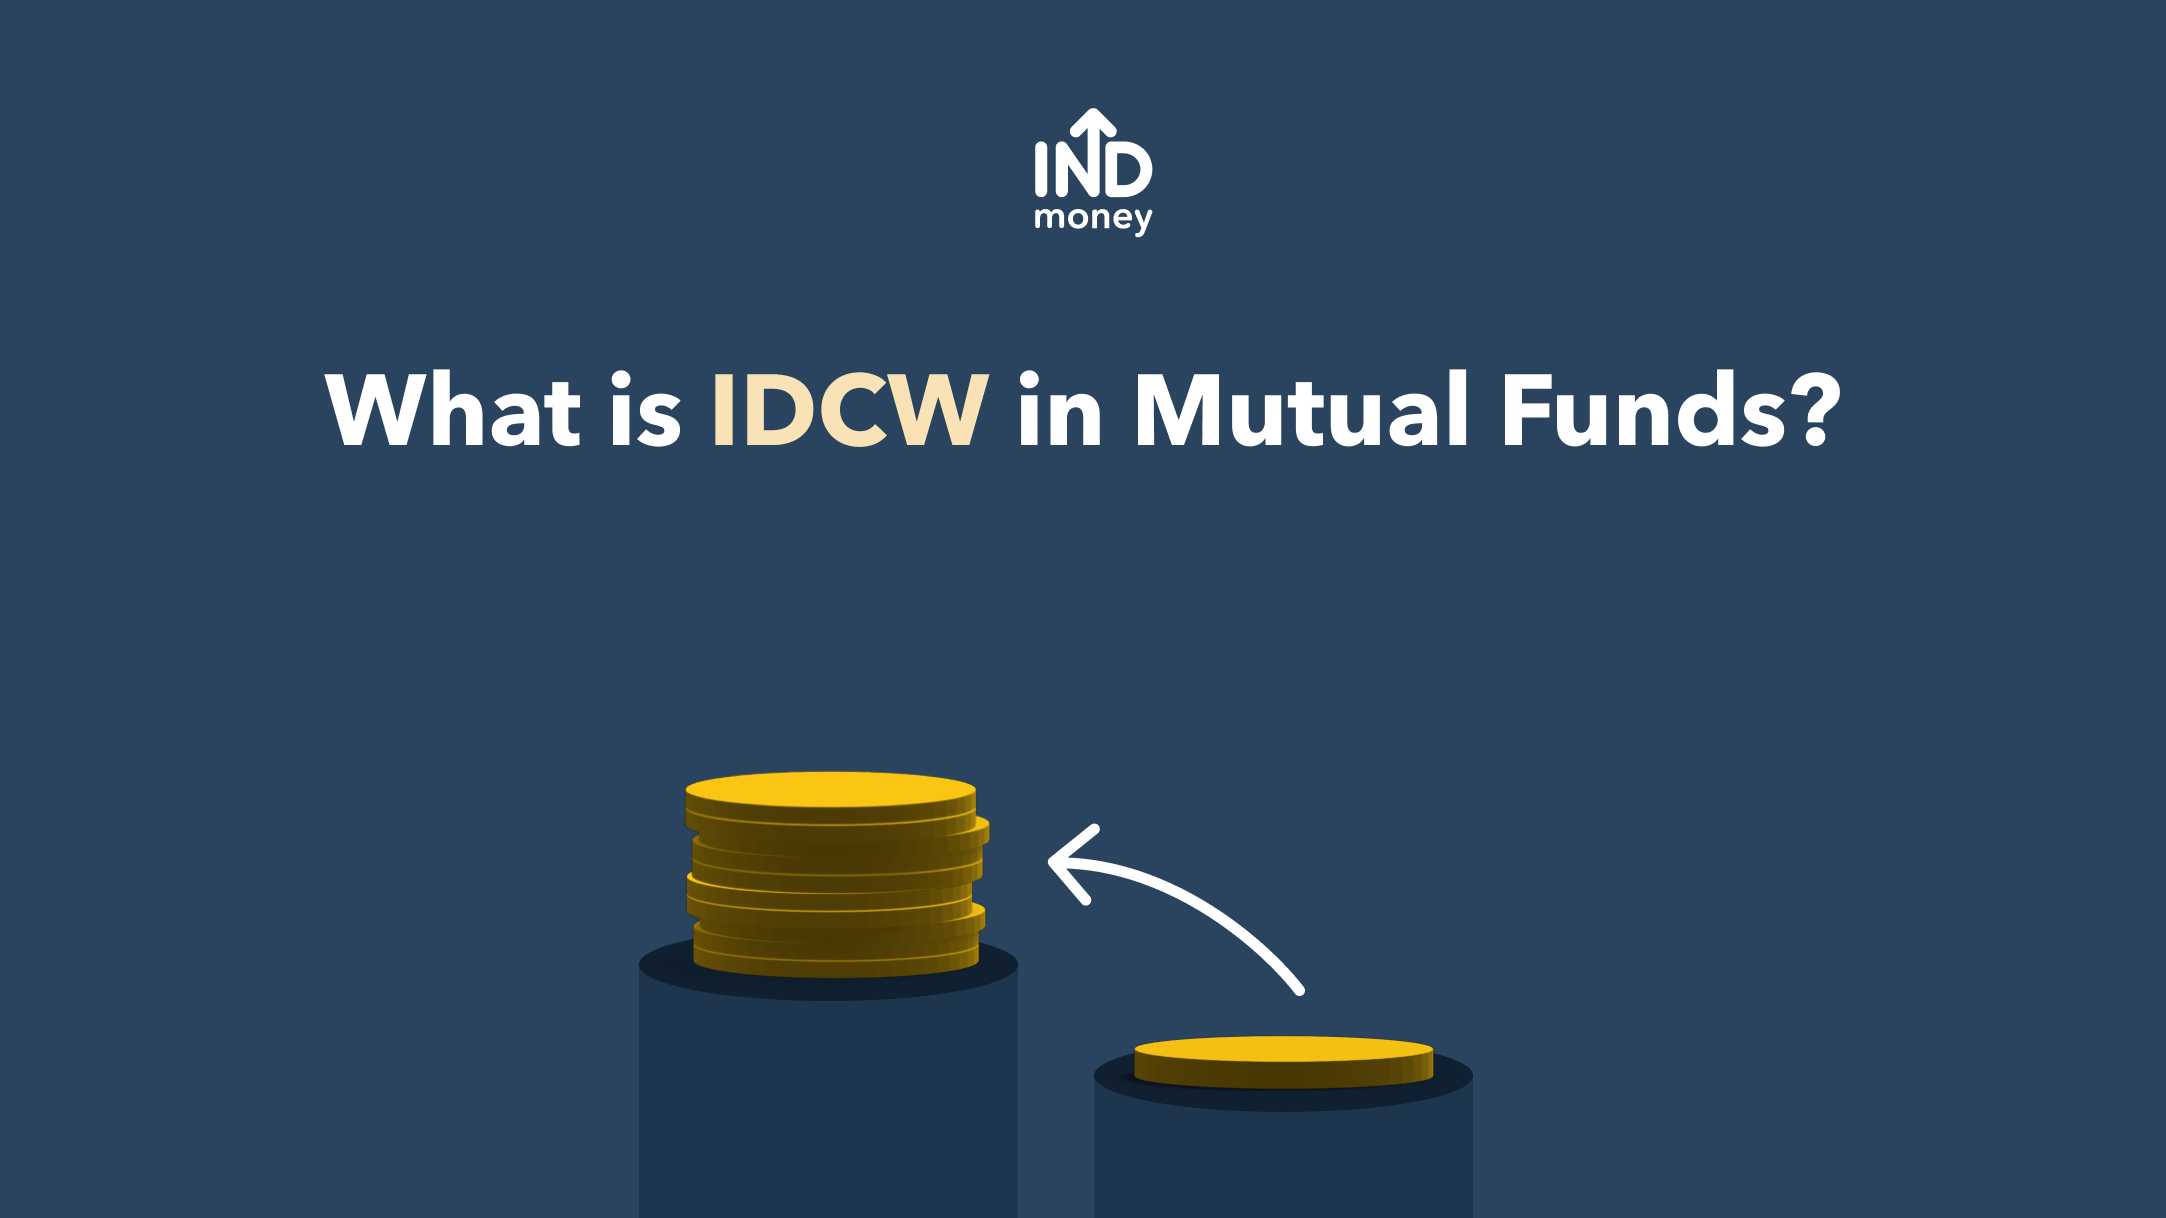 IDCW Mutual Fund: IDCW in Mutual Funds, IDCW Meaning Explained | INDmoney